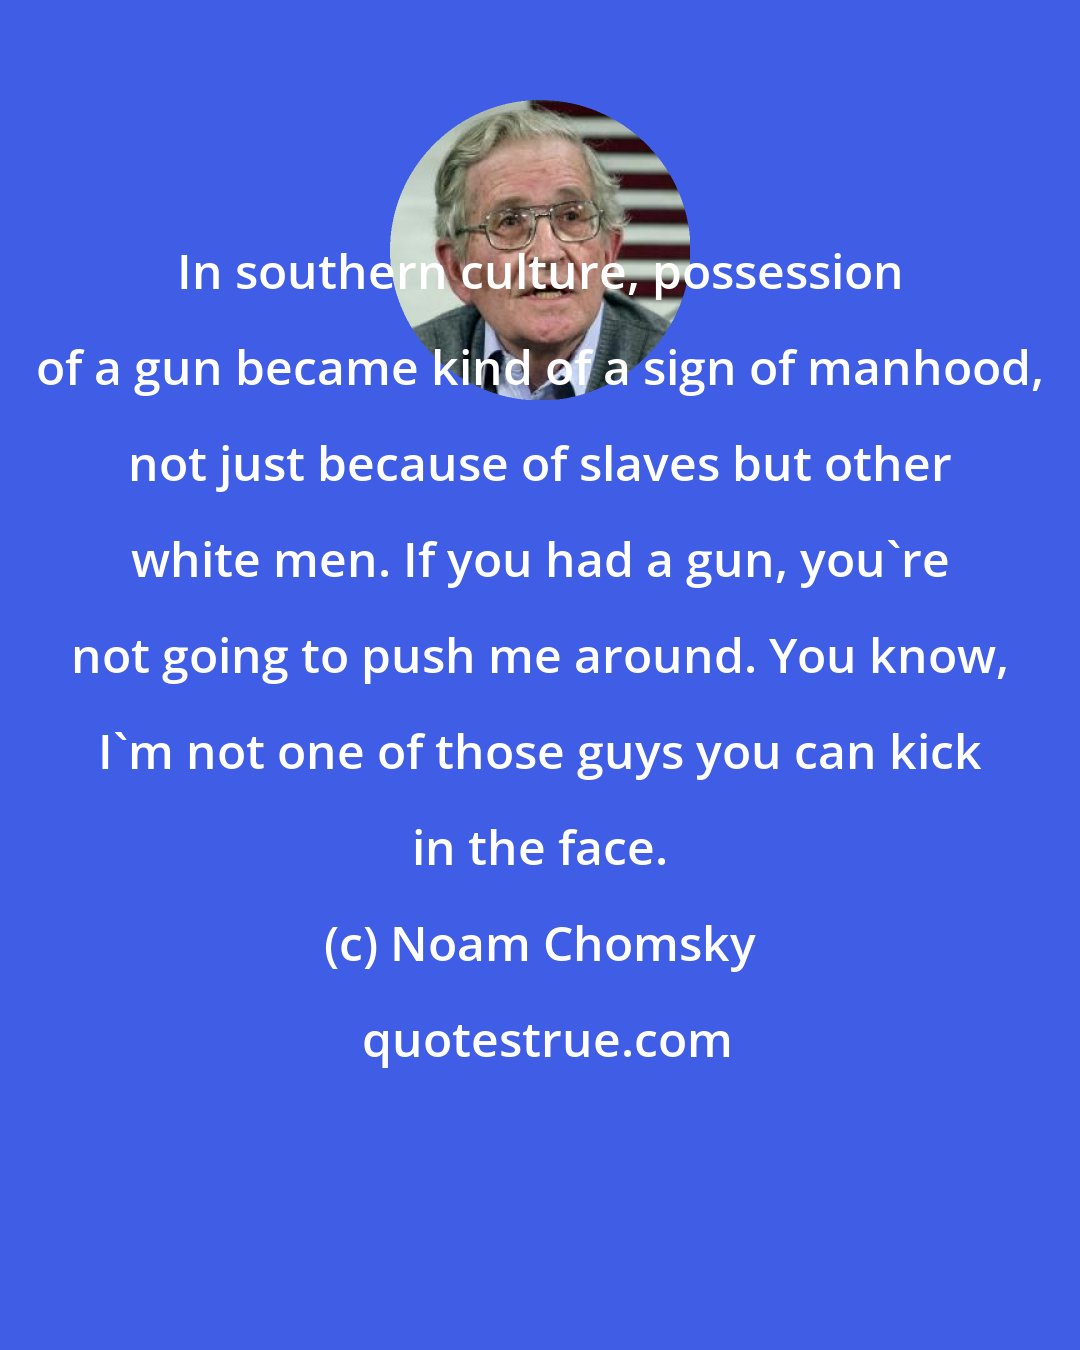 Noam Chomsky: In southern culture, possession of a gun became kind of a sign of manhood, not just because of slaves but other white men. If you had a gun, you're not going to push me around. You know, I'm not one of those guys you can kick in the face.